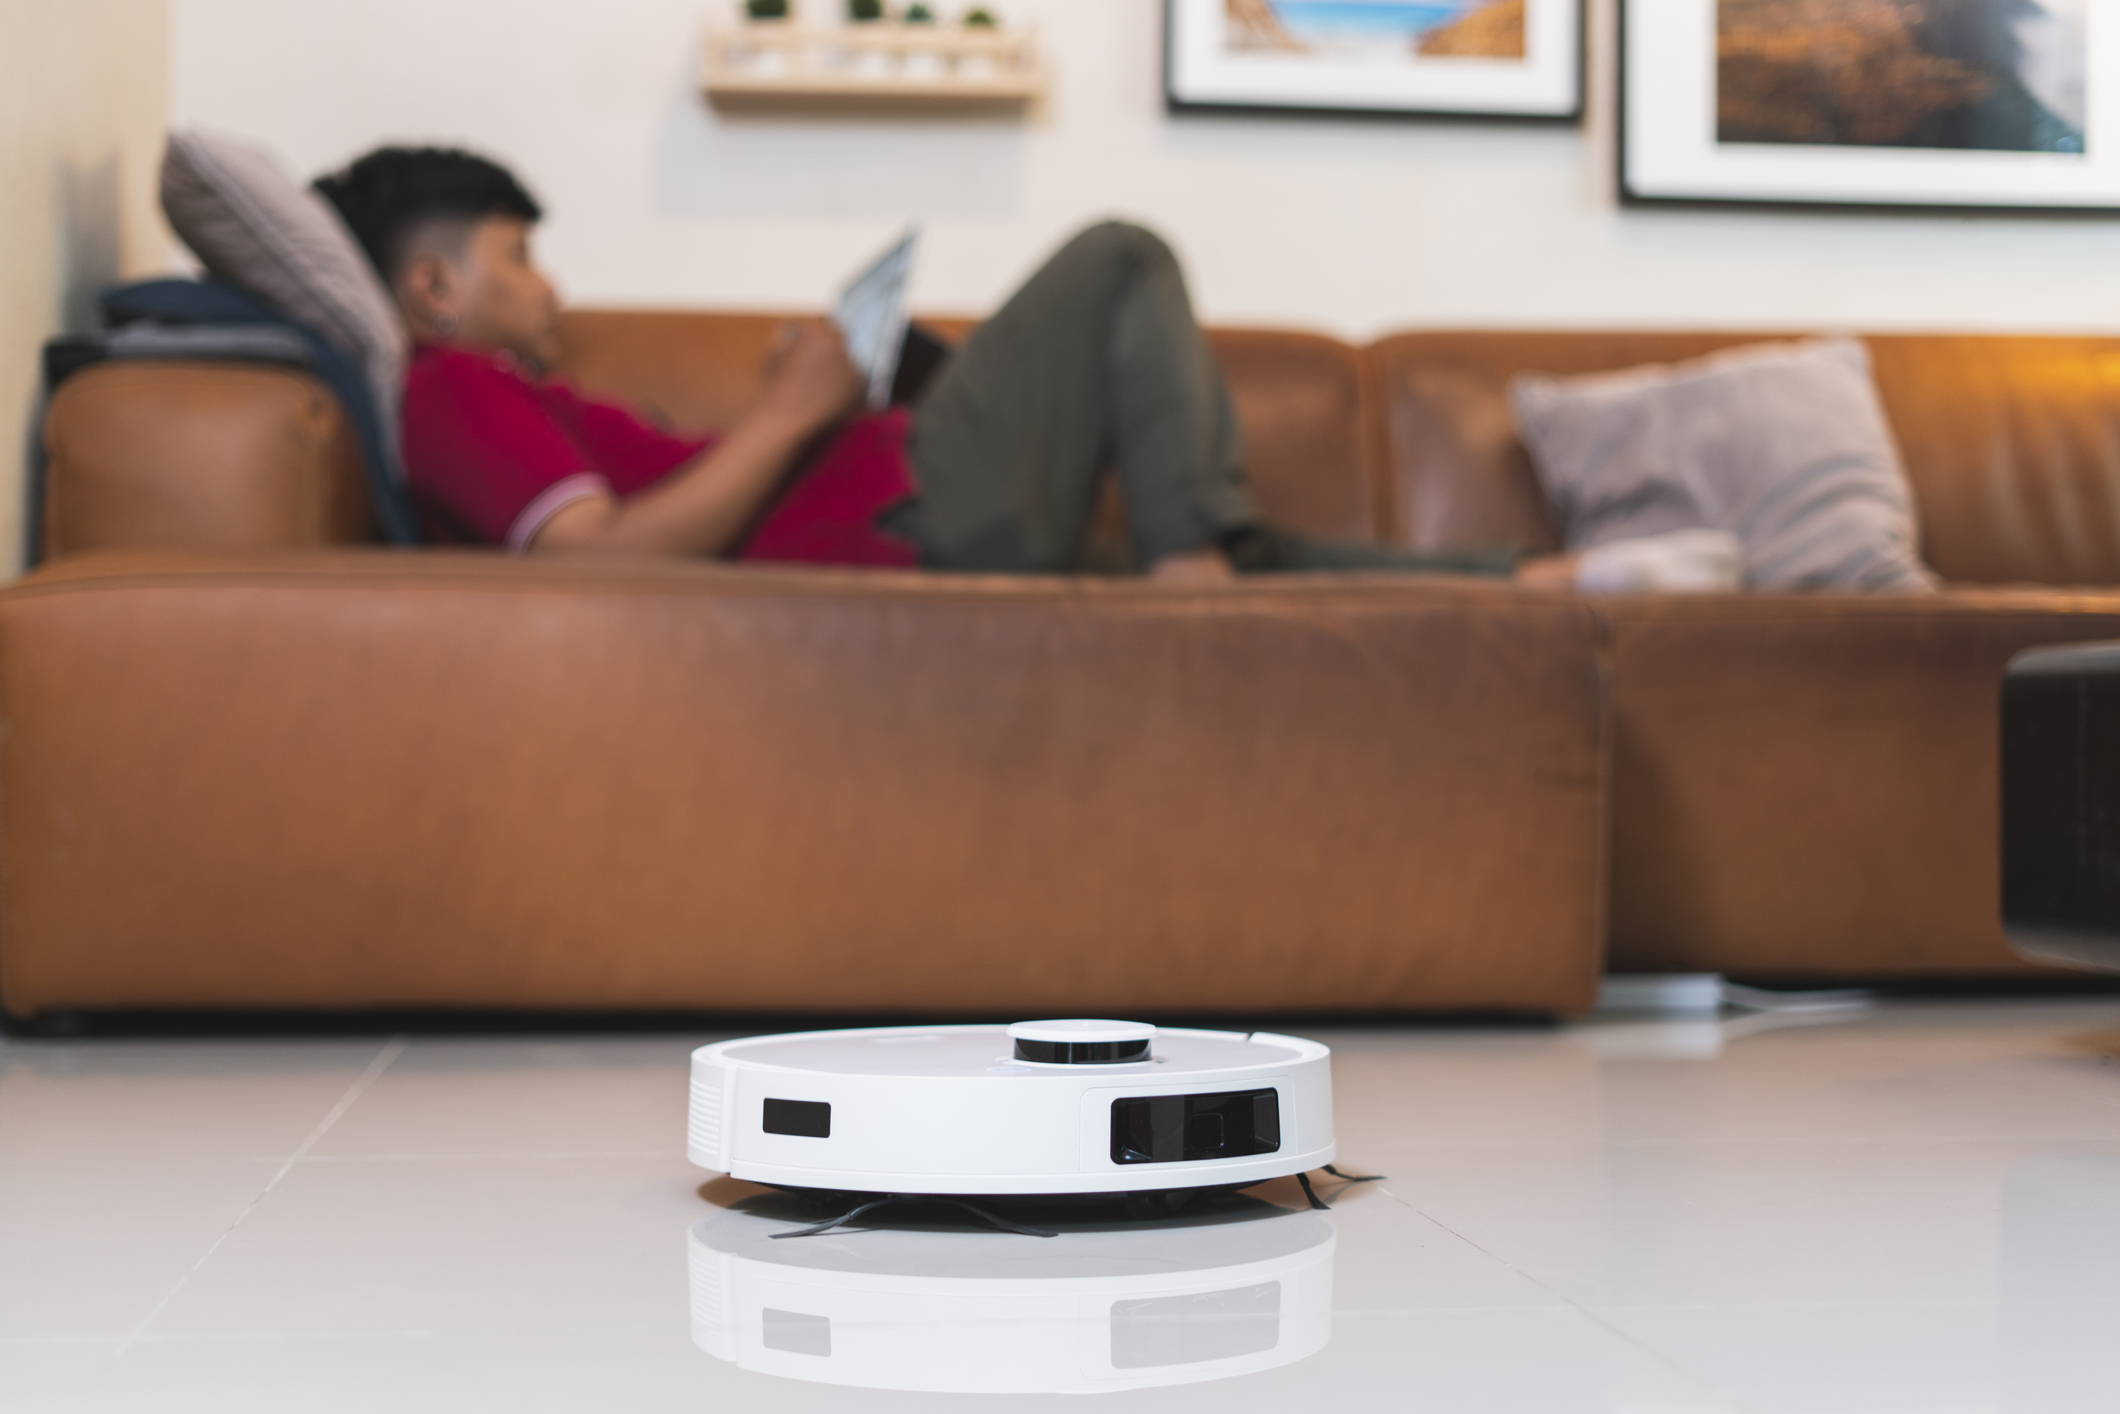 Person relaxing on a couch using a tablet with a robotic vacuum cleaner in the foreground